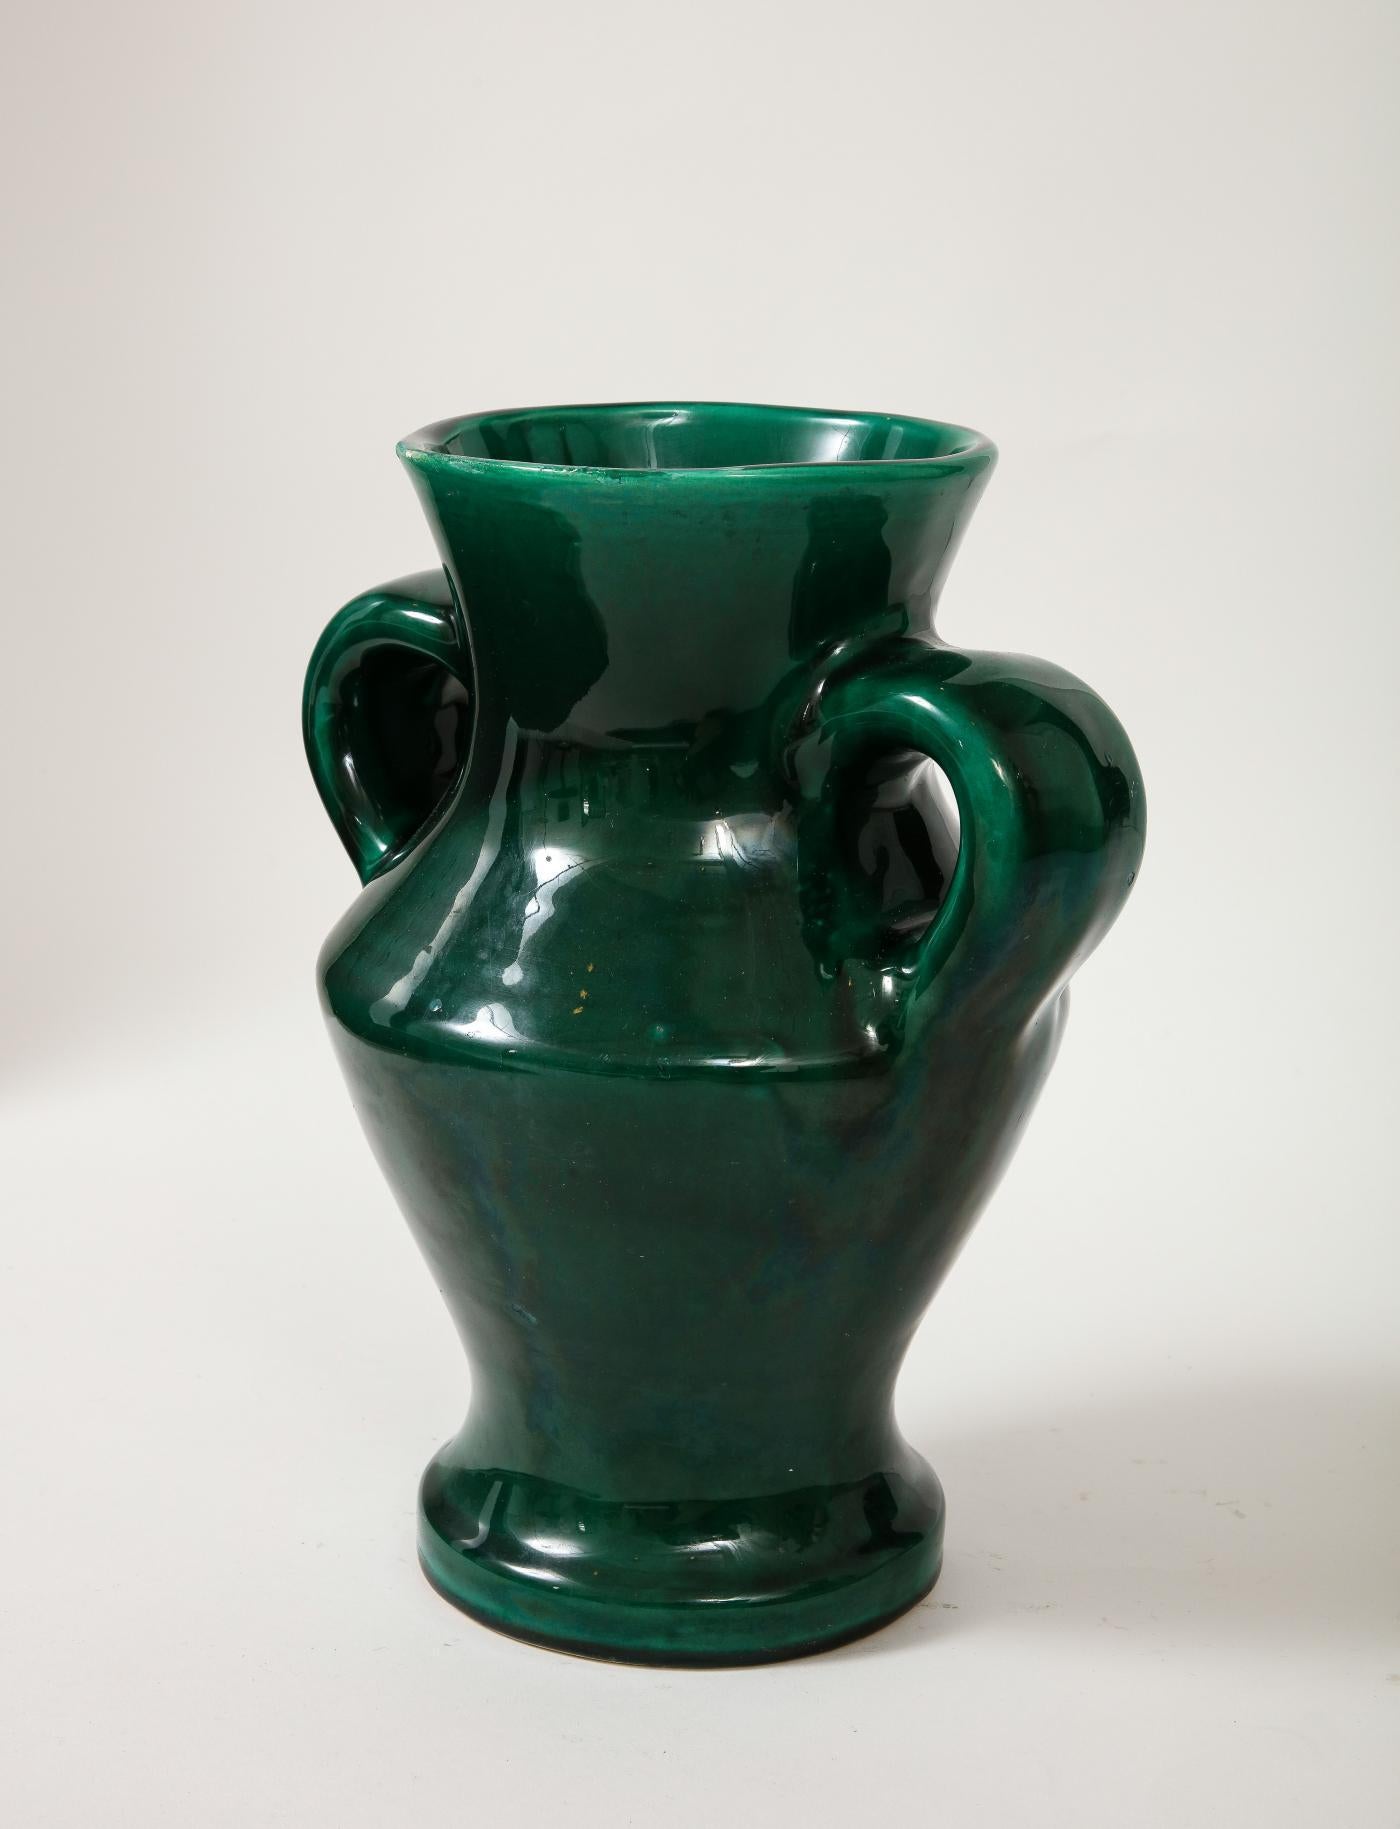 Glazed Ceramic Vase by Roger Capron, c. 1960 In Excellent Condition For Sale In New York City, NY